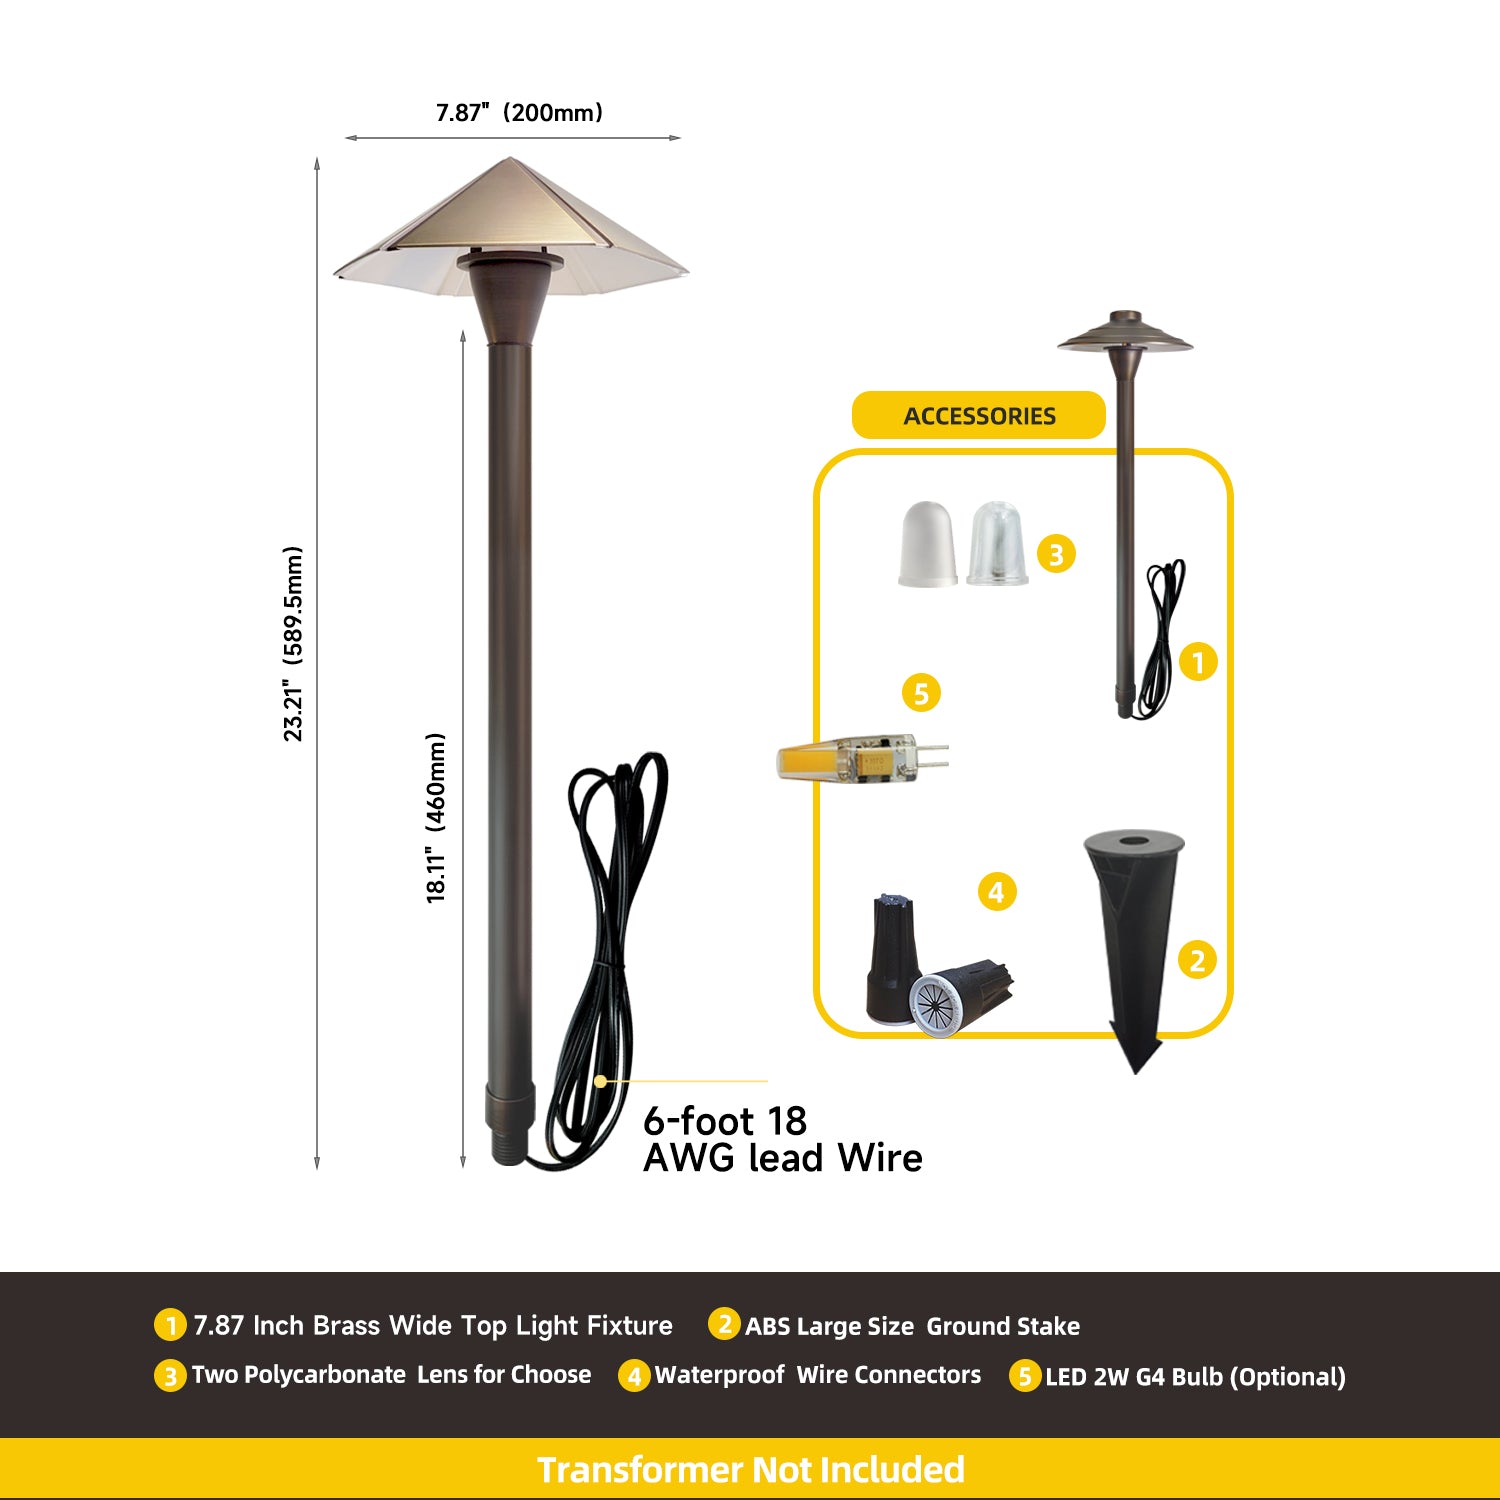 12V Low Voltage Pathway Light with Brass Wide Top Light Fixture, ABS Large Size Ground Stake, 6-foot 18 AWG Lead Wire, two polycarbonate lenses, and LED 2W G4 bulb. Transformer not included.